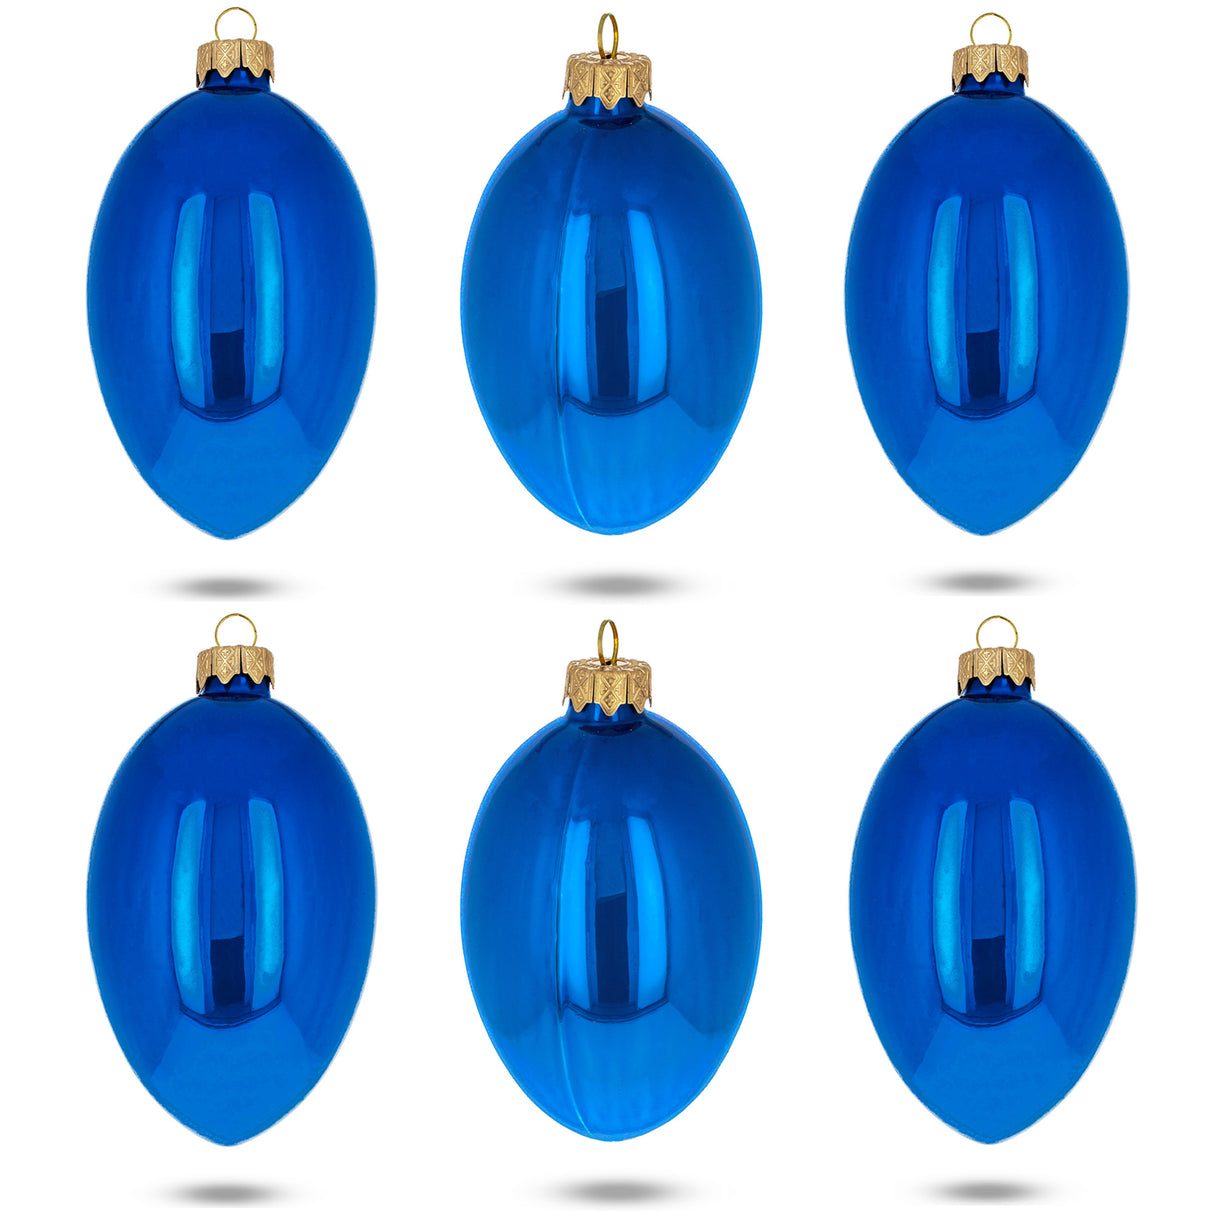 Glass Set of 6 Blue Glossy Glass Egg Ornaments 4 Inches in Blue color Oval